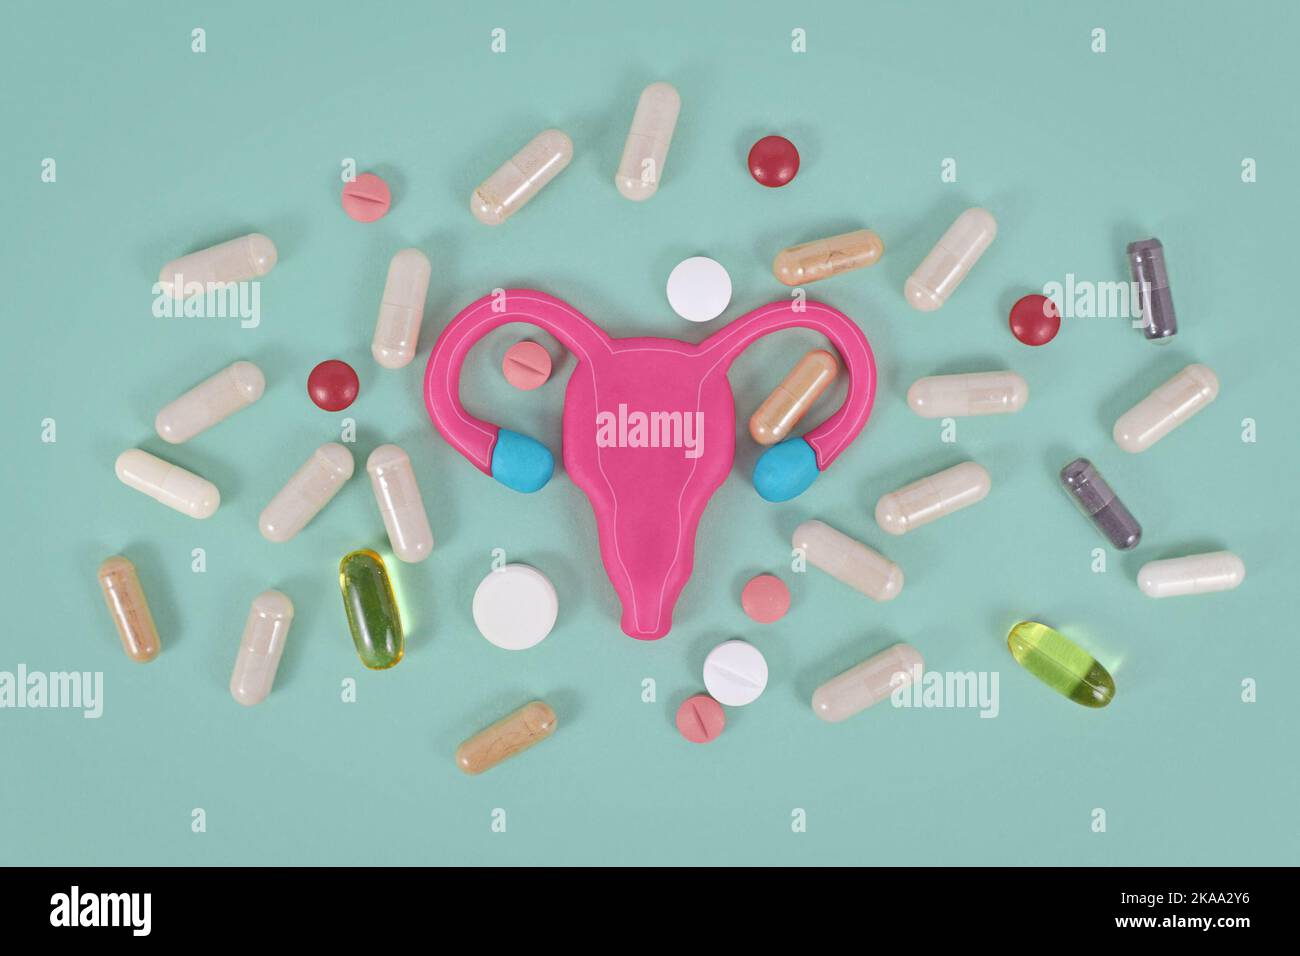 Concept for using medicine to boost female fertility showing stylized uterus and pills Stock Photo